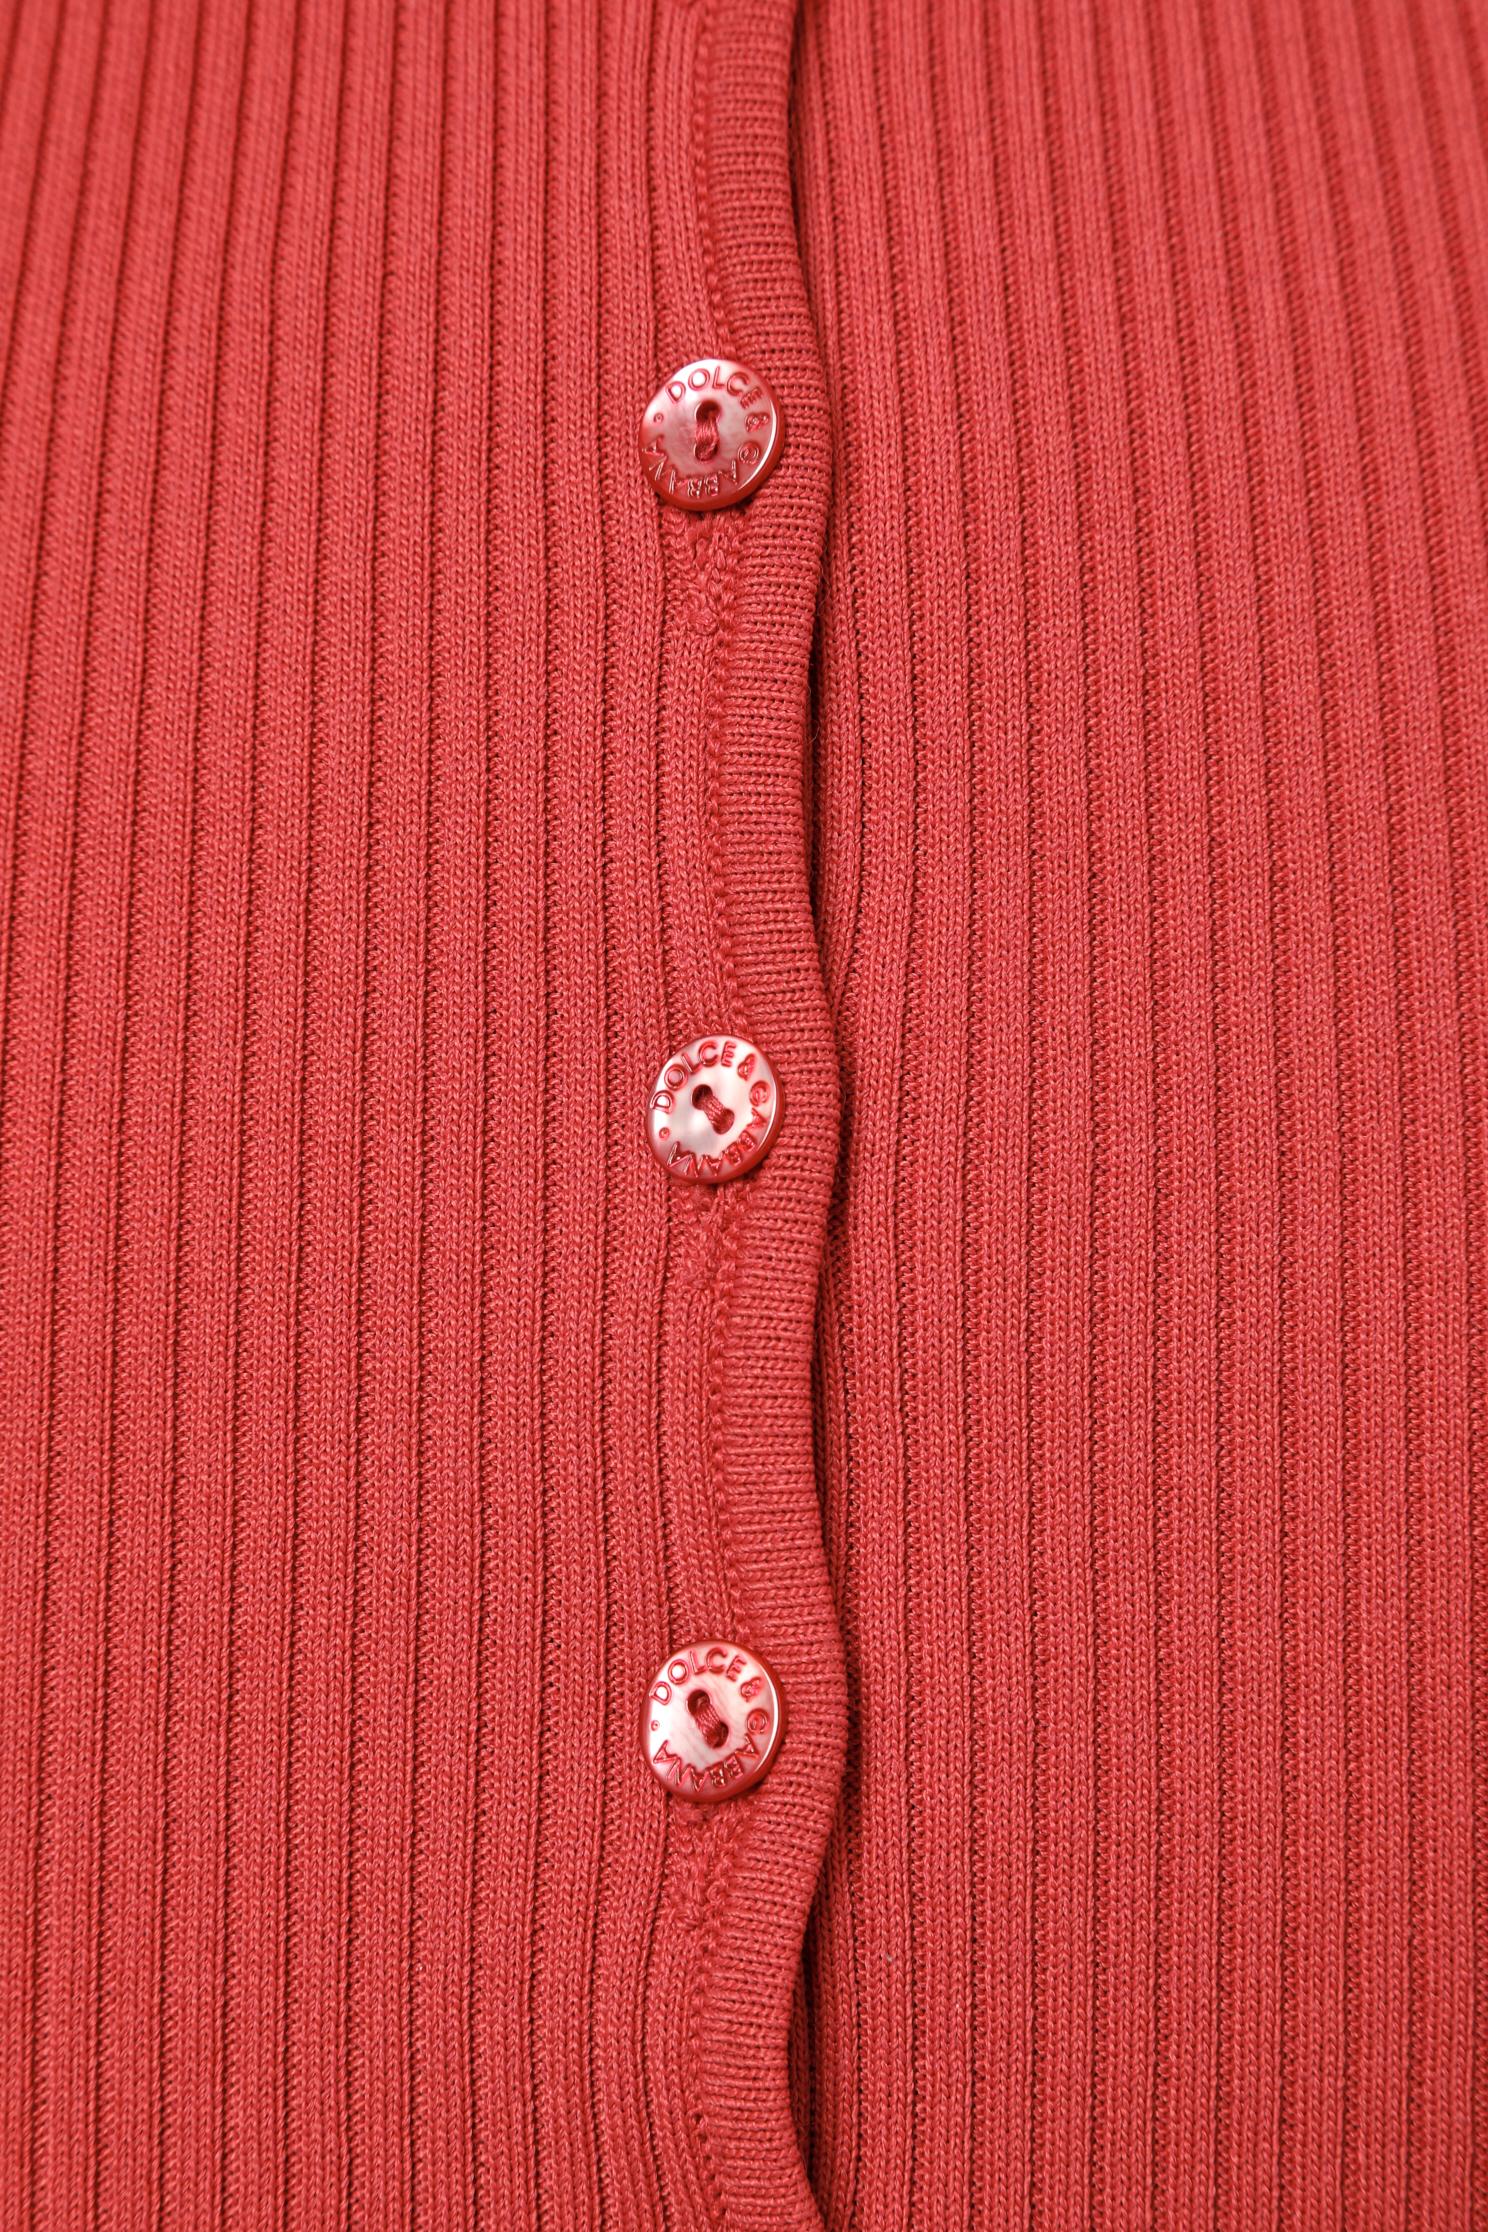 Red knit cardigan with branded buttons Dolce & Gabbana  In Excellent Condition For Sale In Saint-Ouen-Sur-Seine, FR